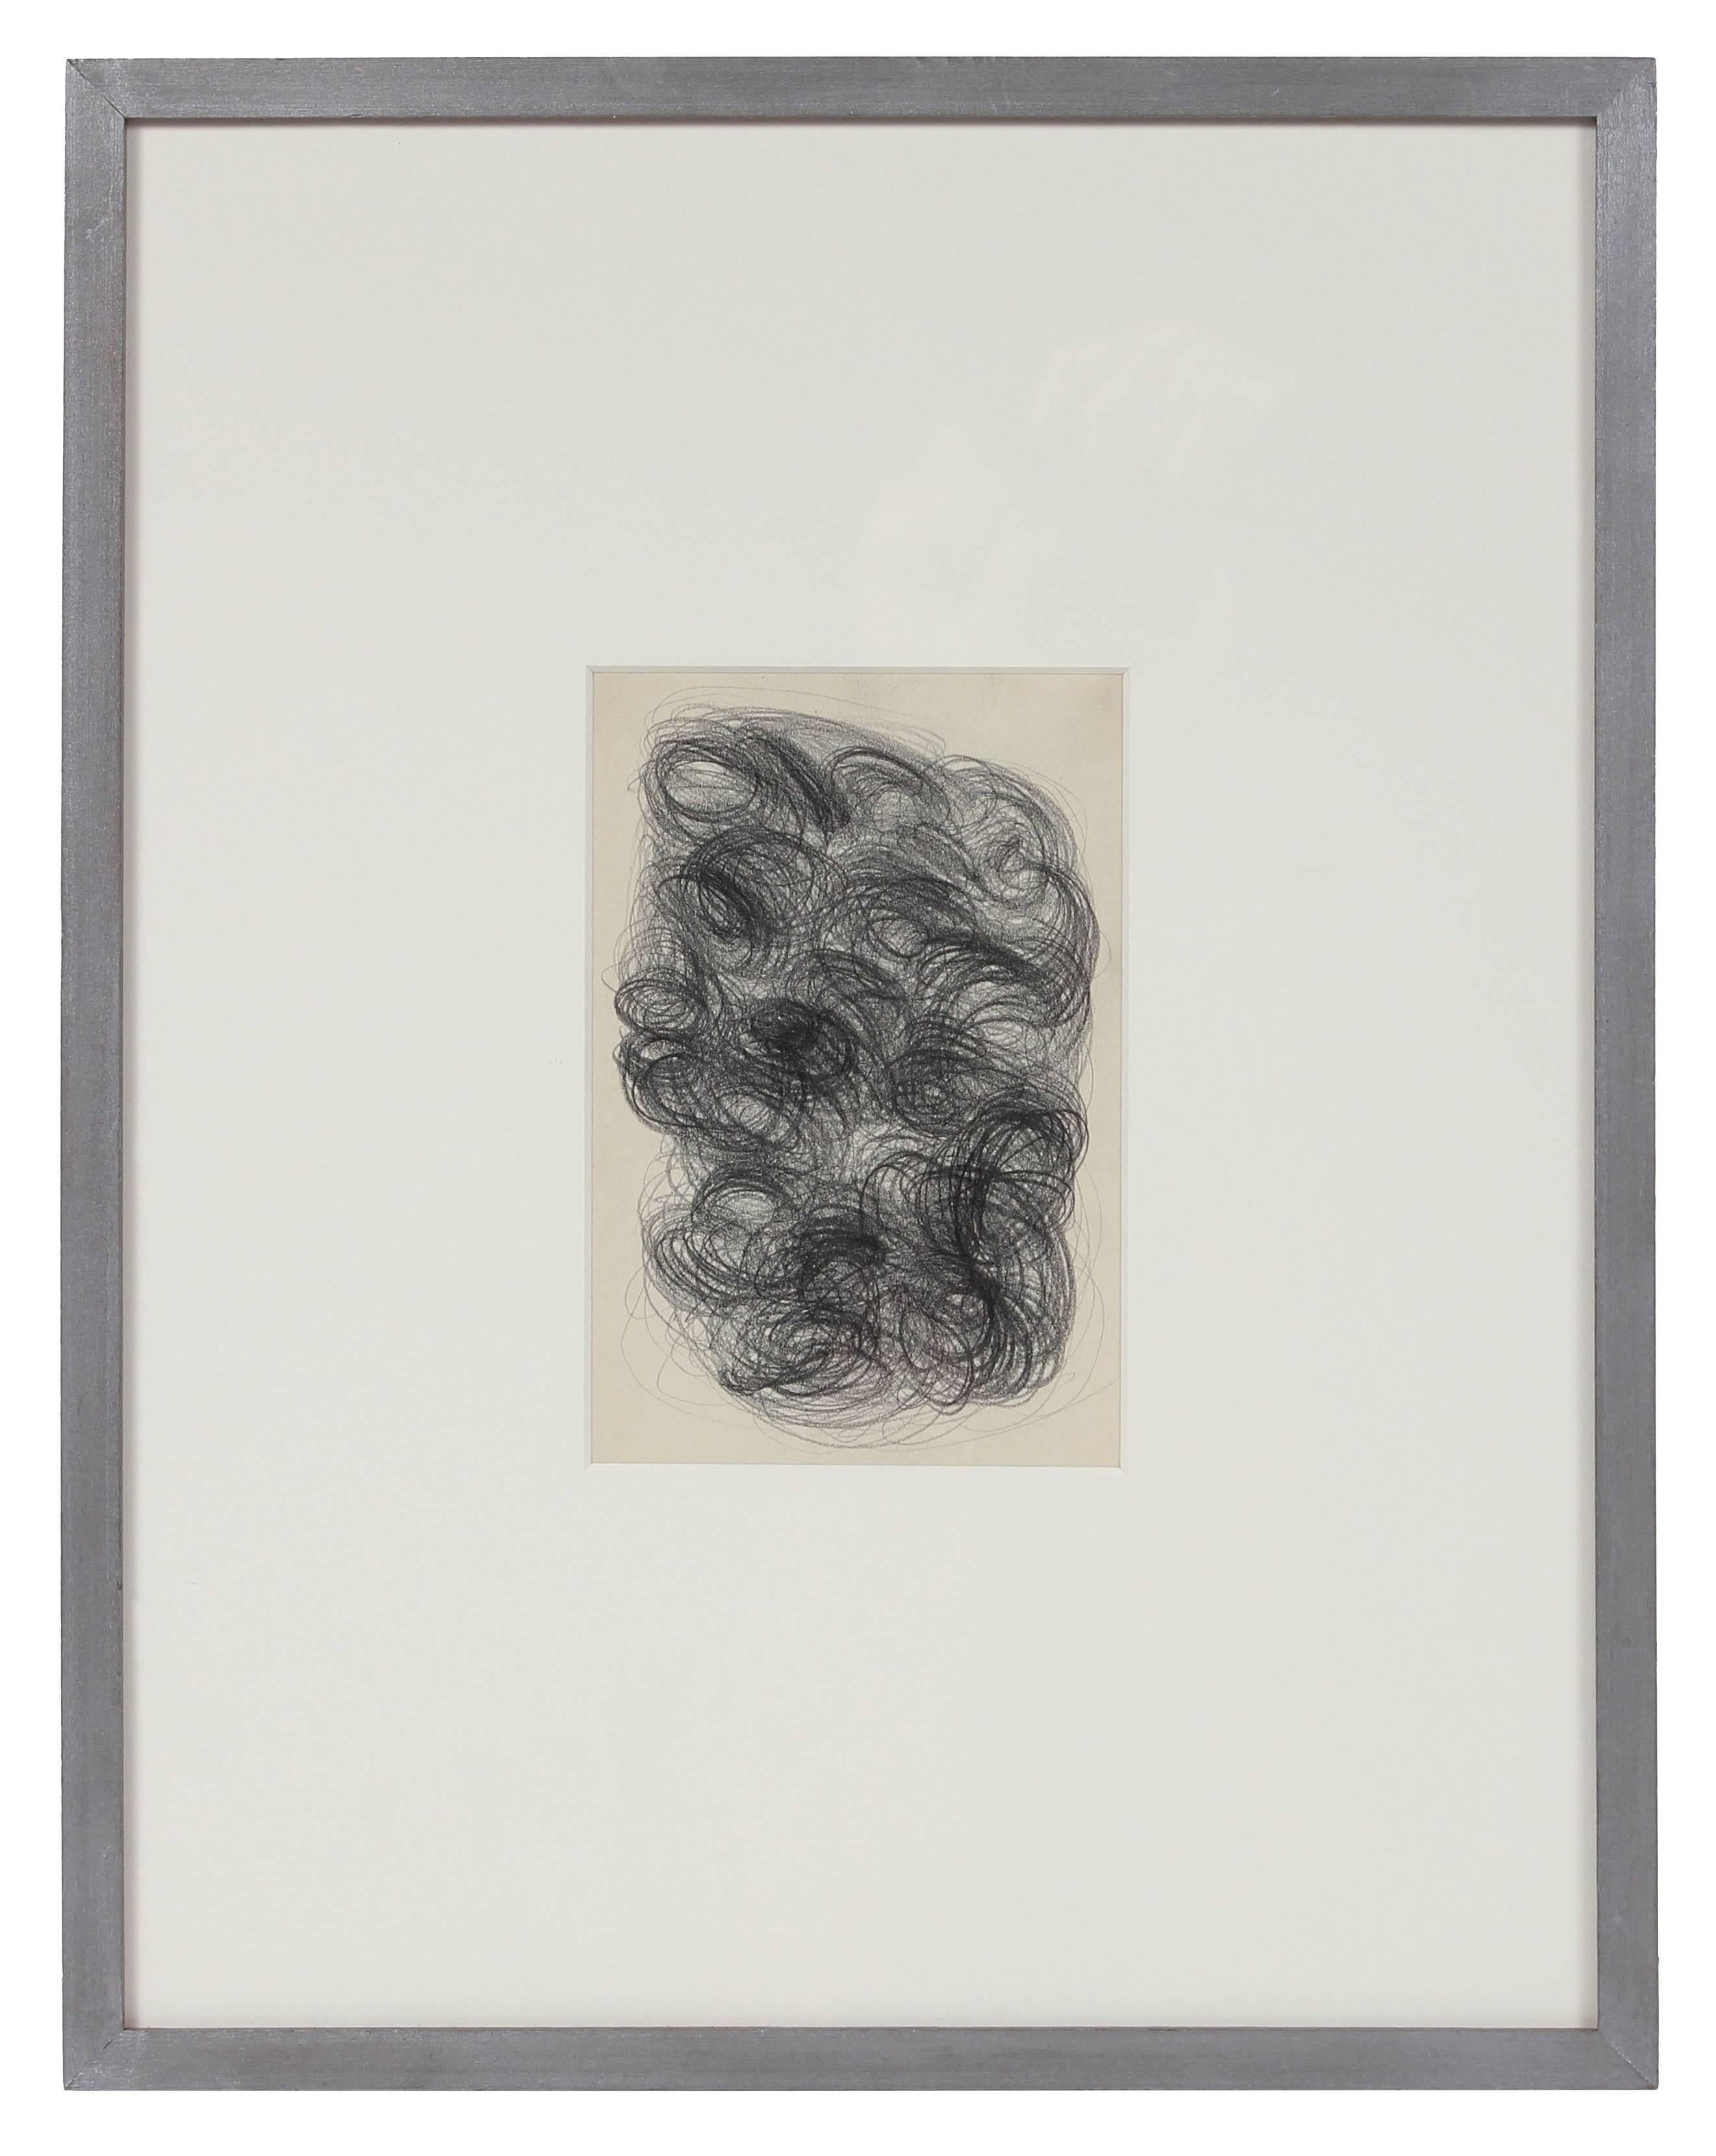 Swirled Abstract in Graphite, Framed, Circa Mid 20th Century - Art by Jennings Tofel